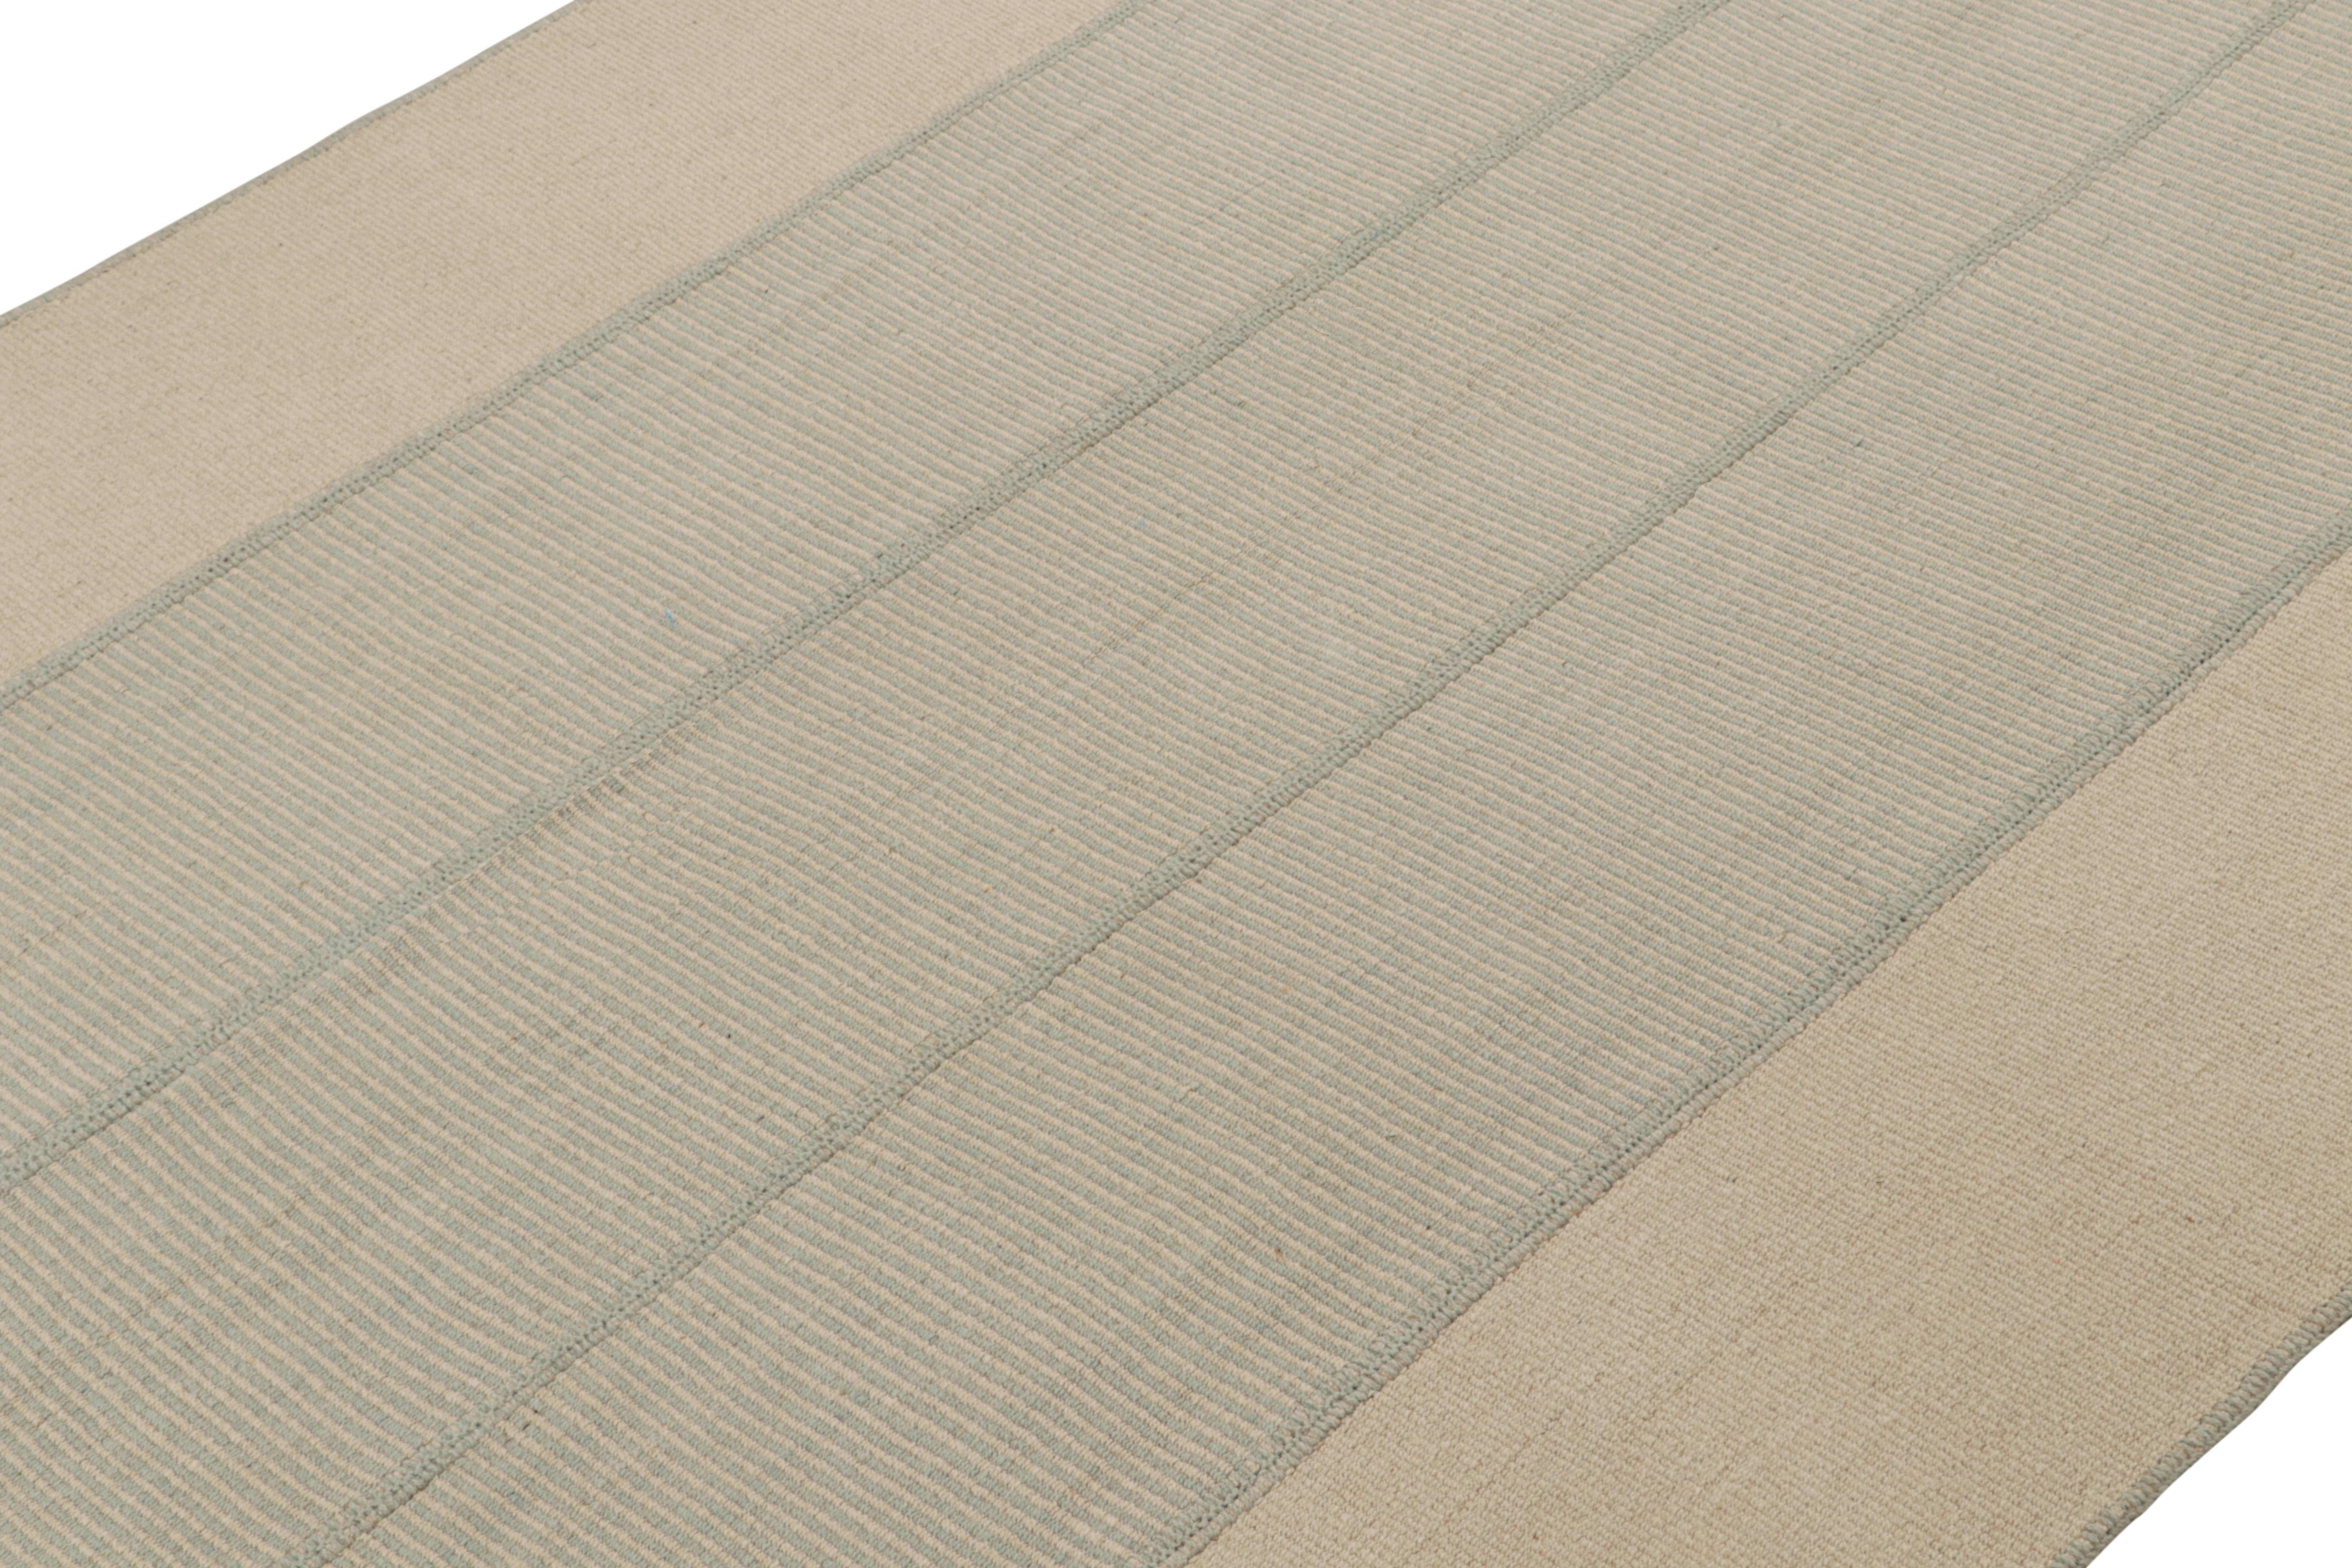 Handwoven in wool, an 8x10 Kilim design from an inventive new contemporary flat weave collection by Rug & Kilim.

On the Design: 

Fondly dubbed, “Rez Kilims”, this modern take on classic panel-weaving enjoys a fabulous, unique play of white &